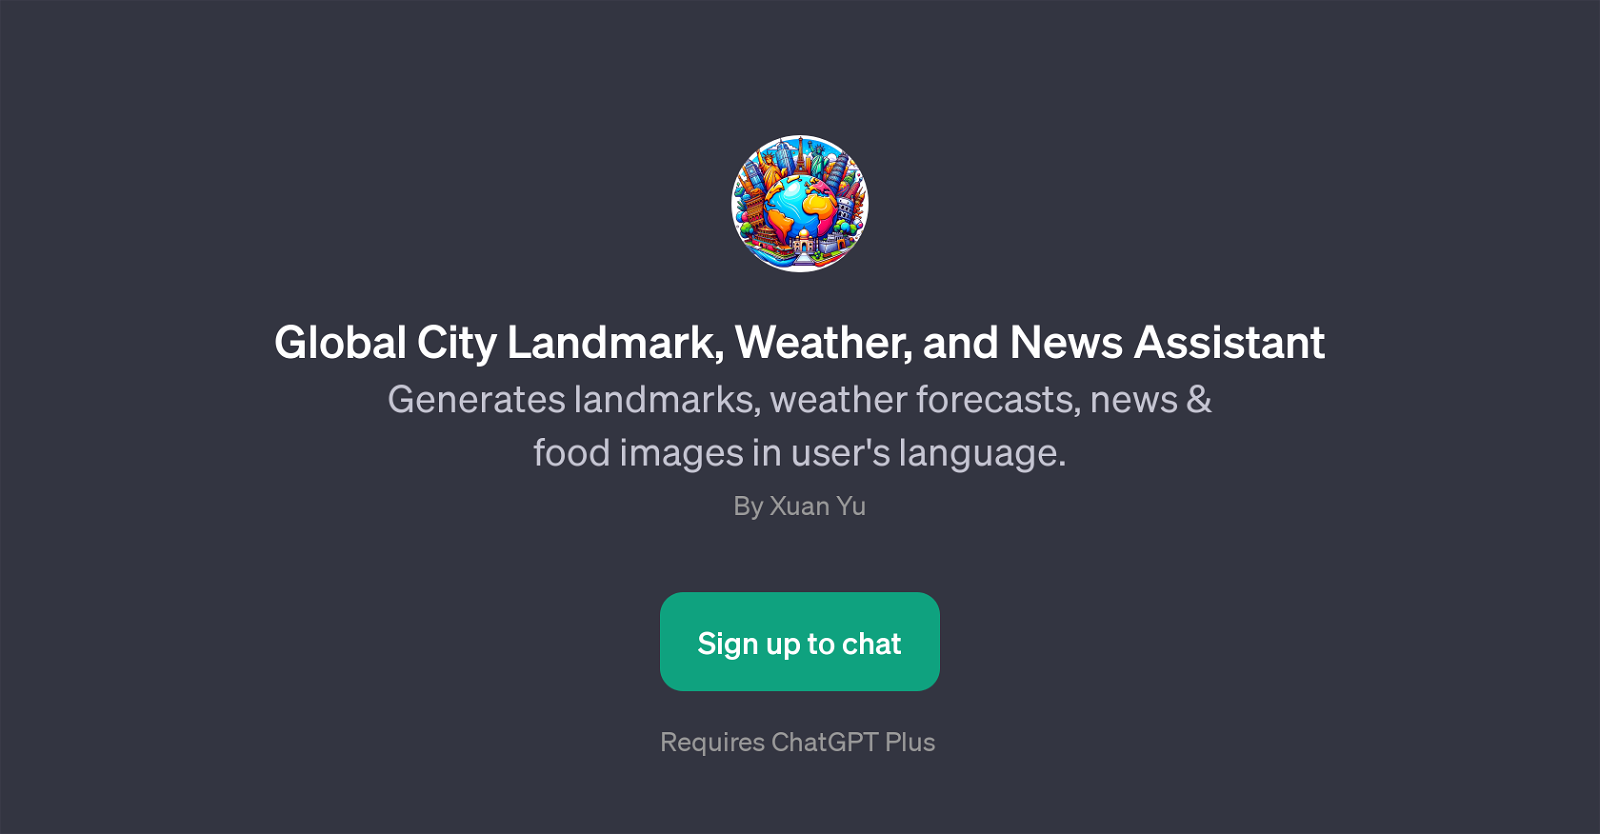 Global City Landmark, Weather, and News Assistant website